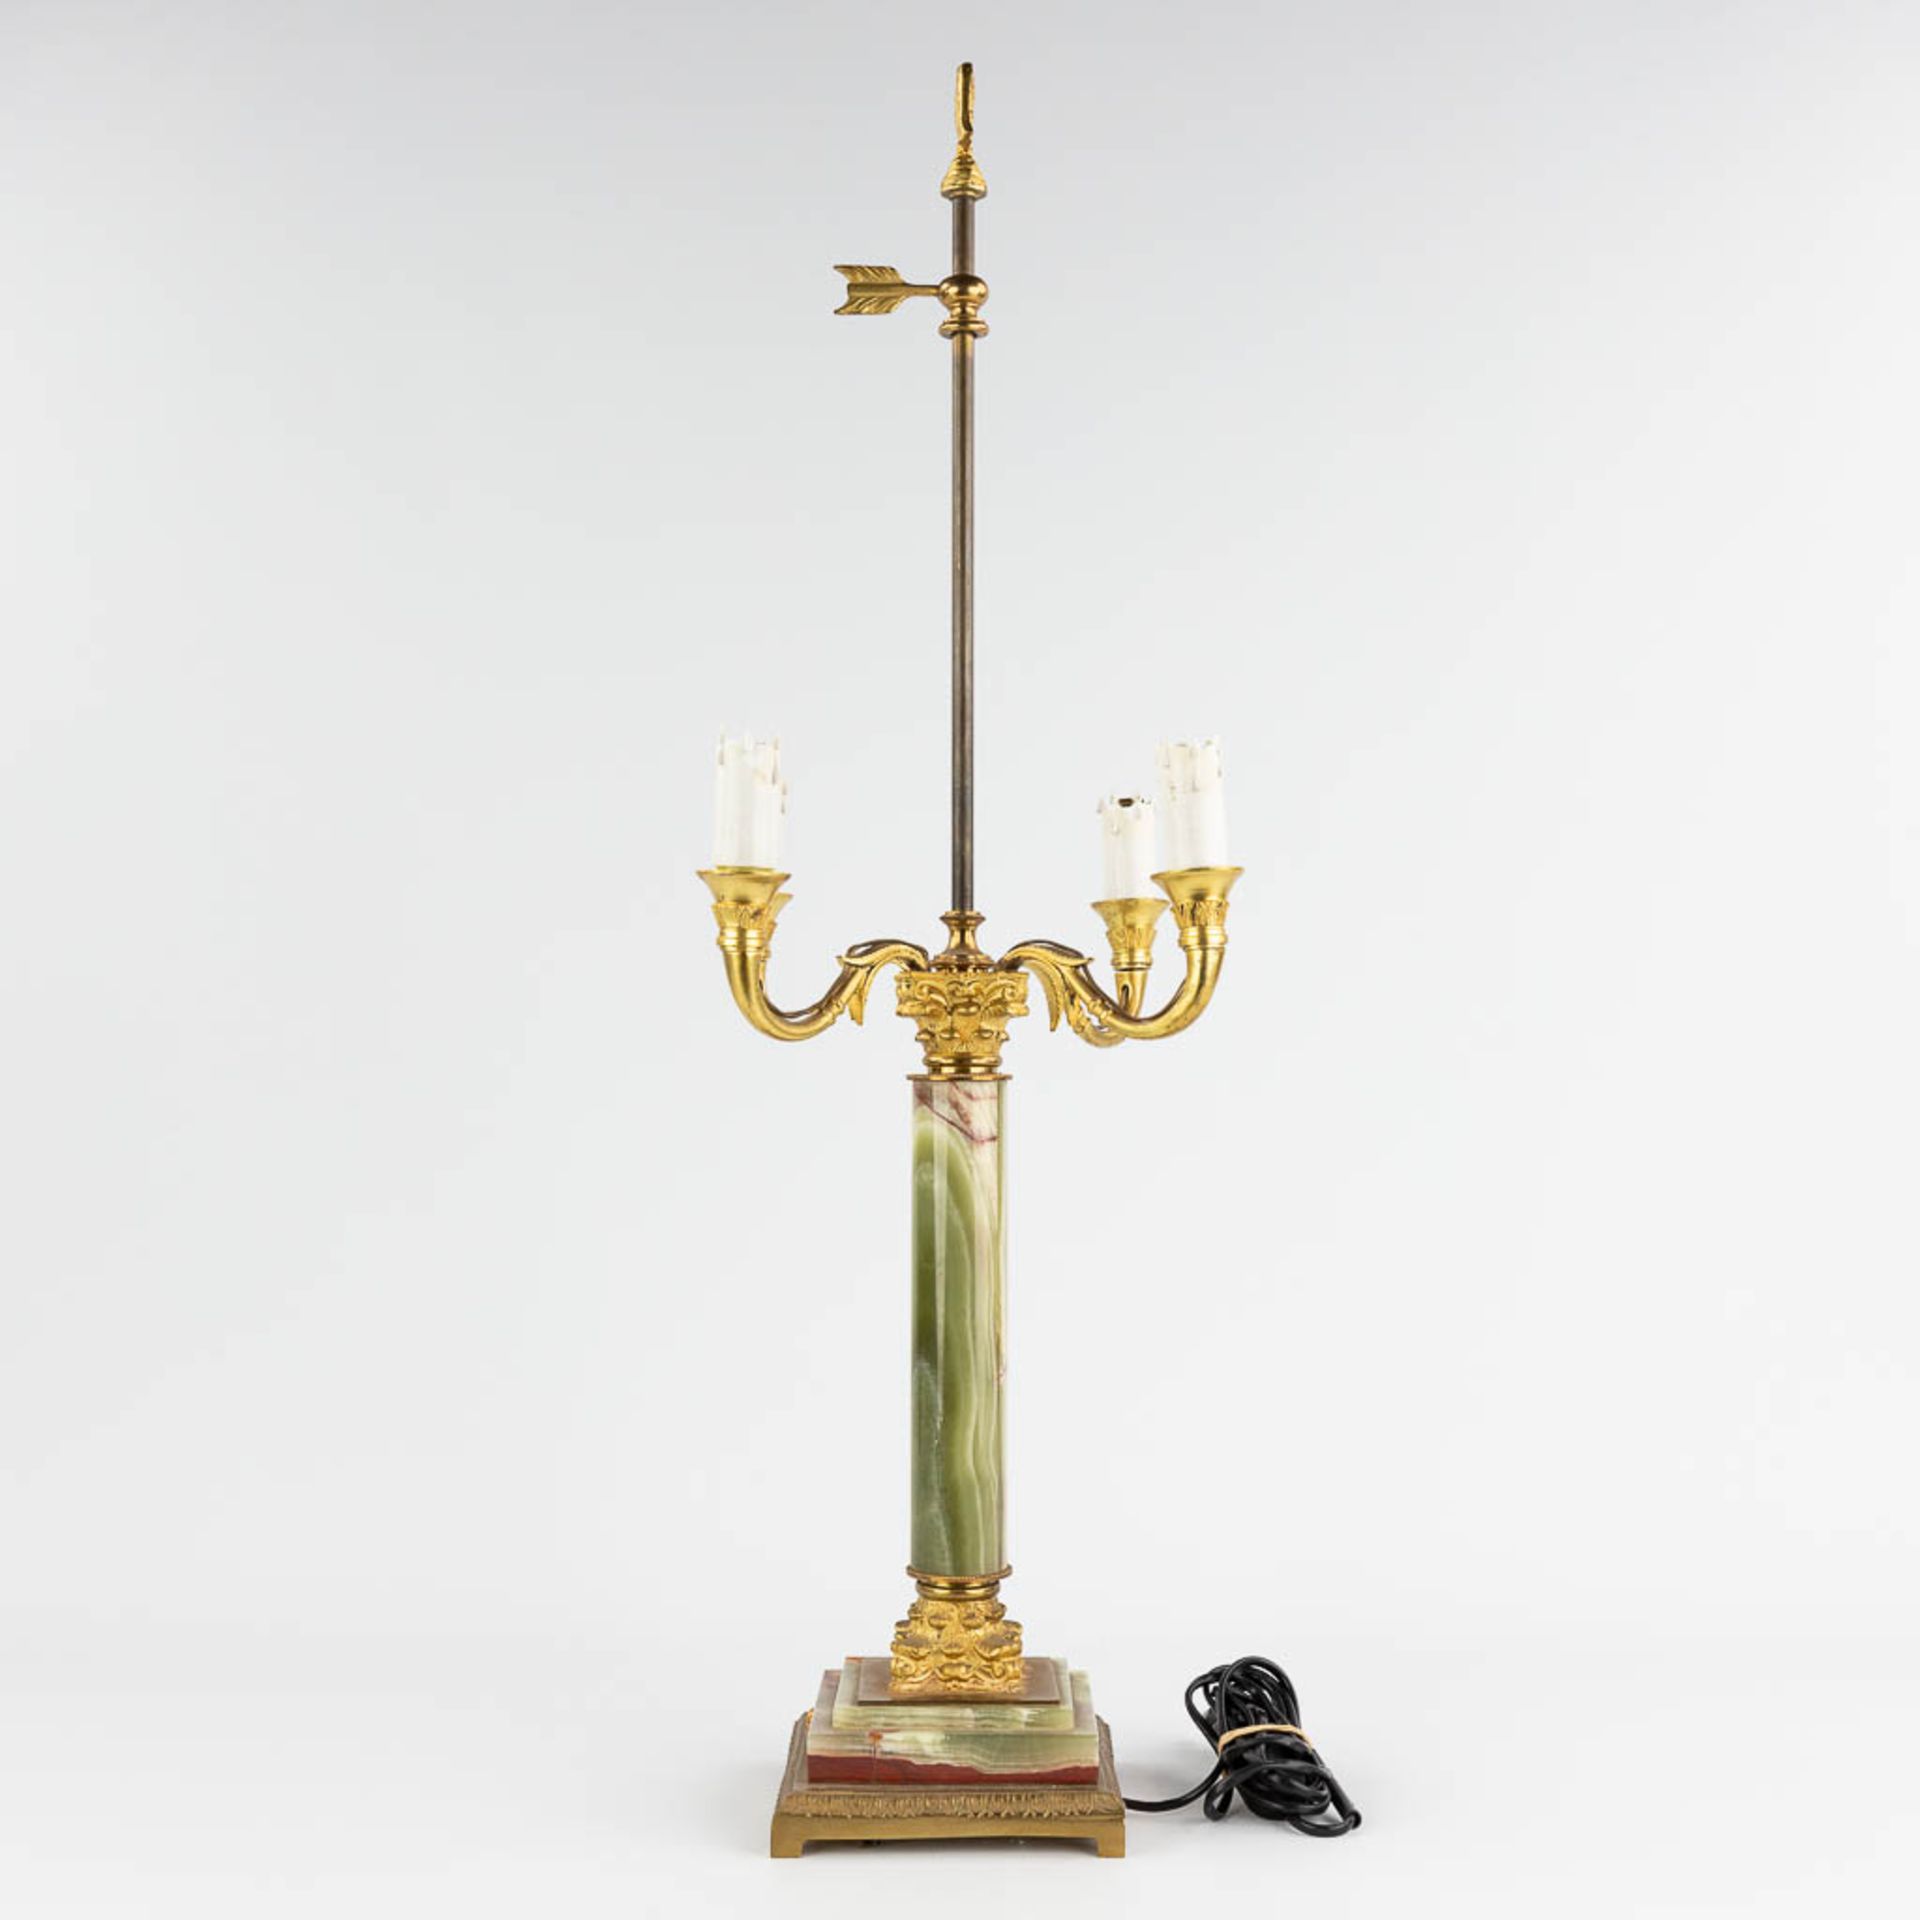 A table lamp, brass and onyx. 20th century. (L: 30 x W: 30 x H: 77 cm) - Image 6 of 13